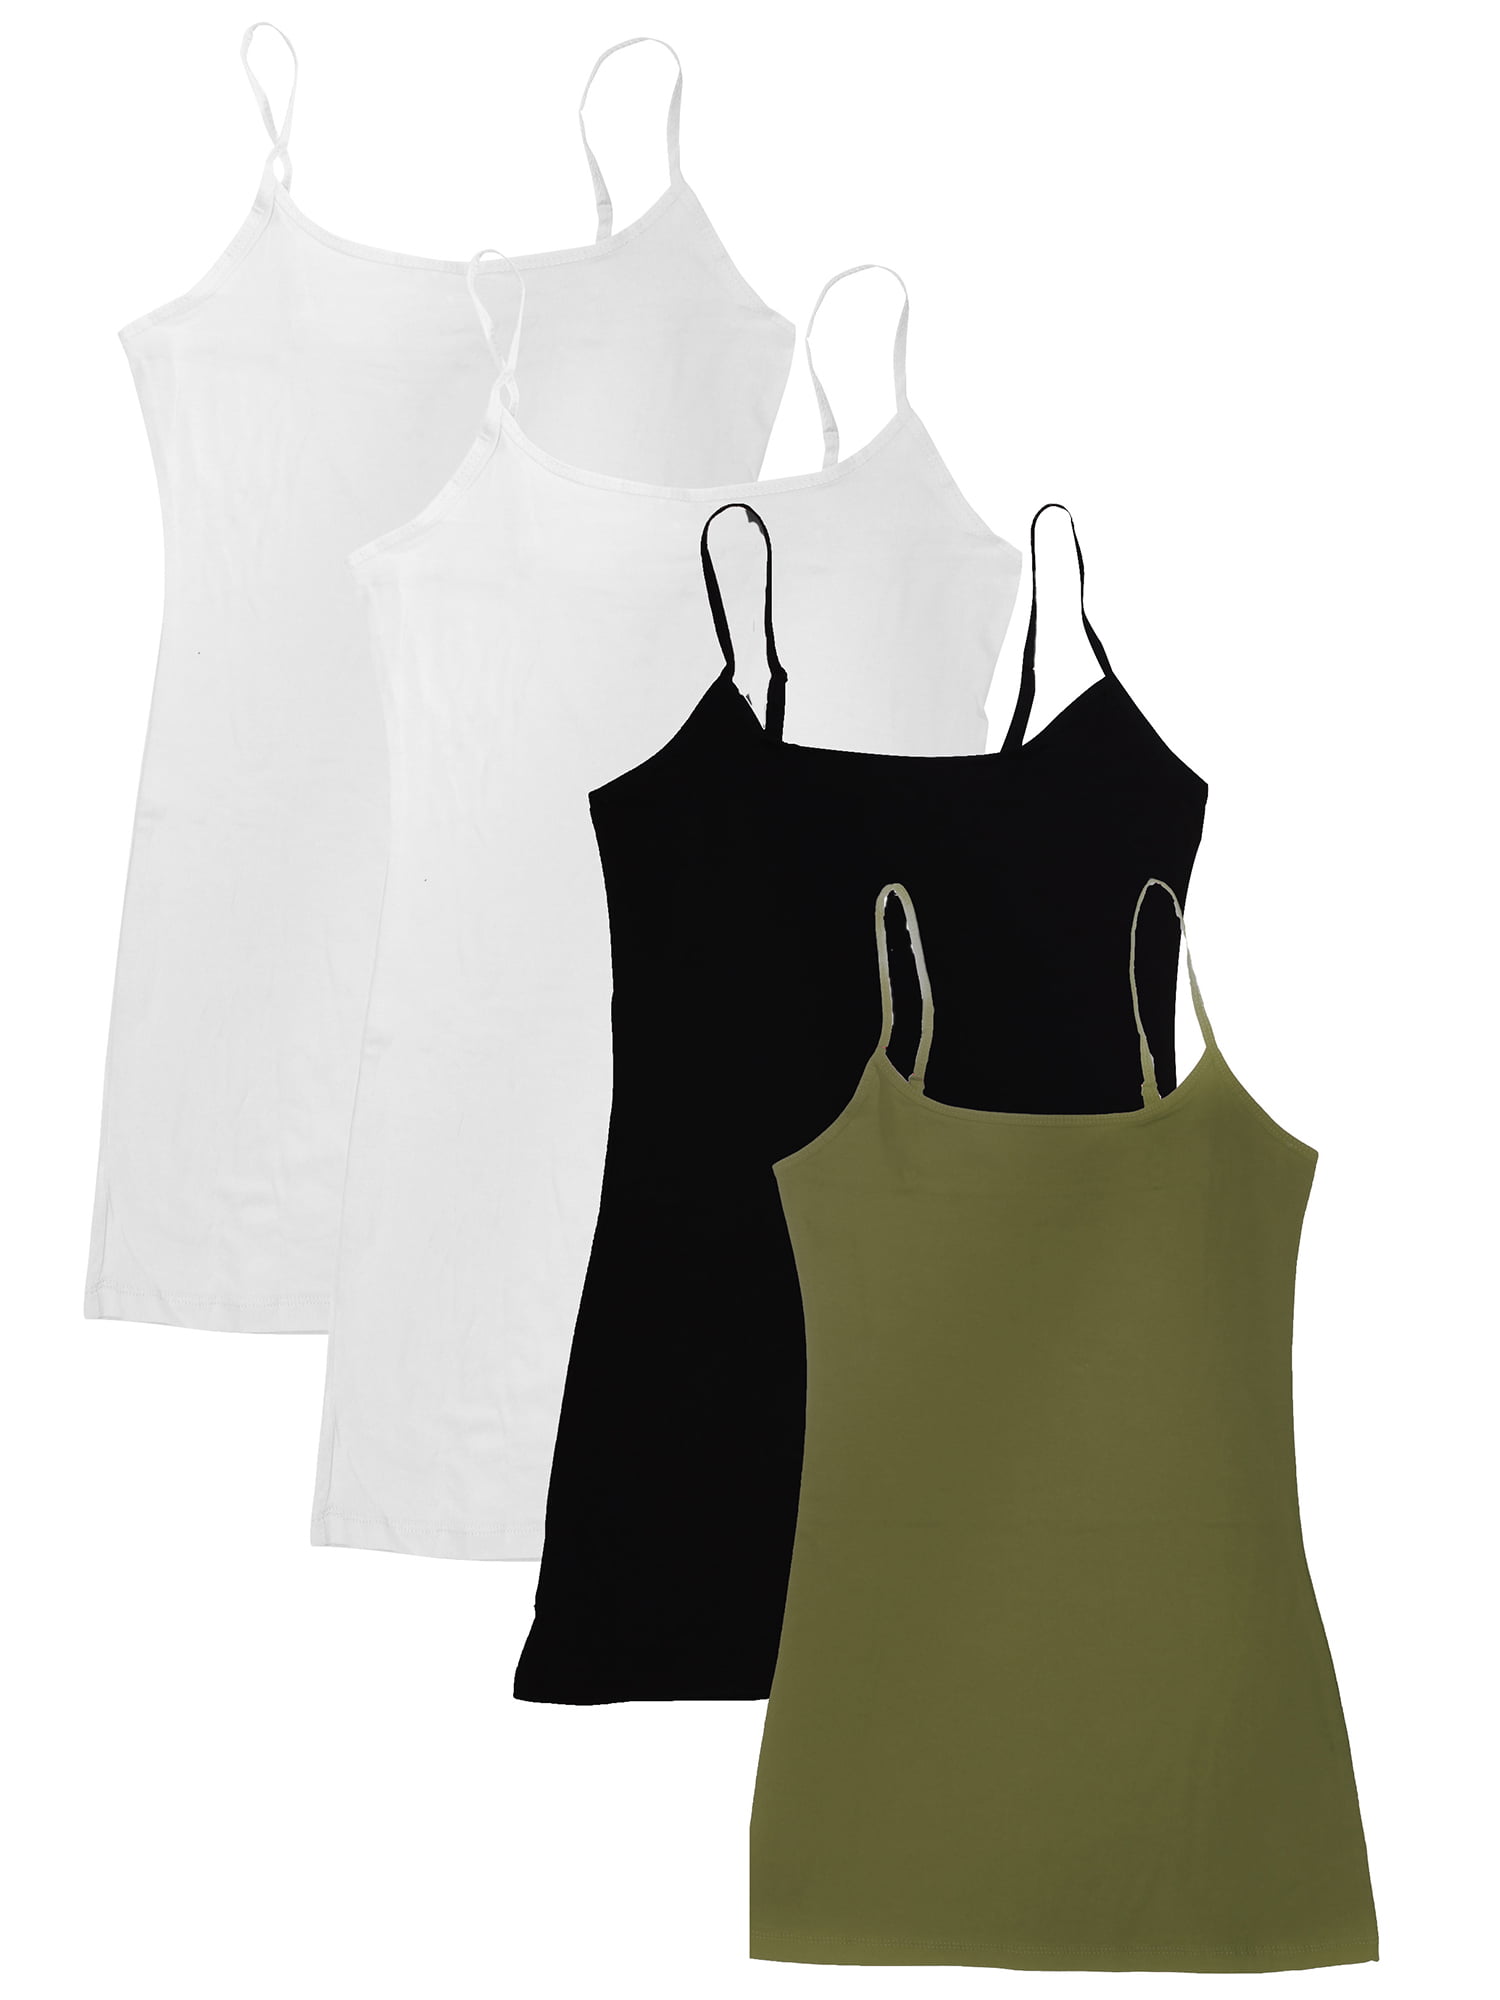 Essential Basic Women Value Pack Deal Cami Tanks Adjustable Spagetti Strap  Many Colors - Small to 3XL 